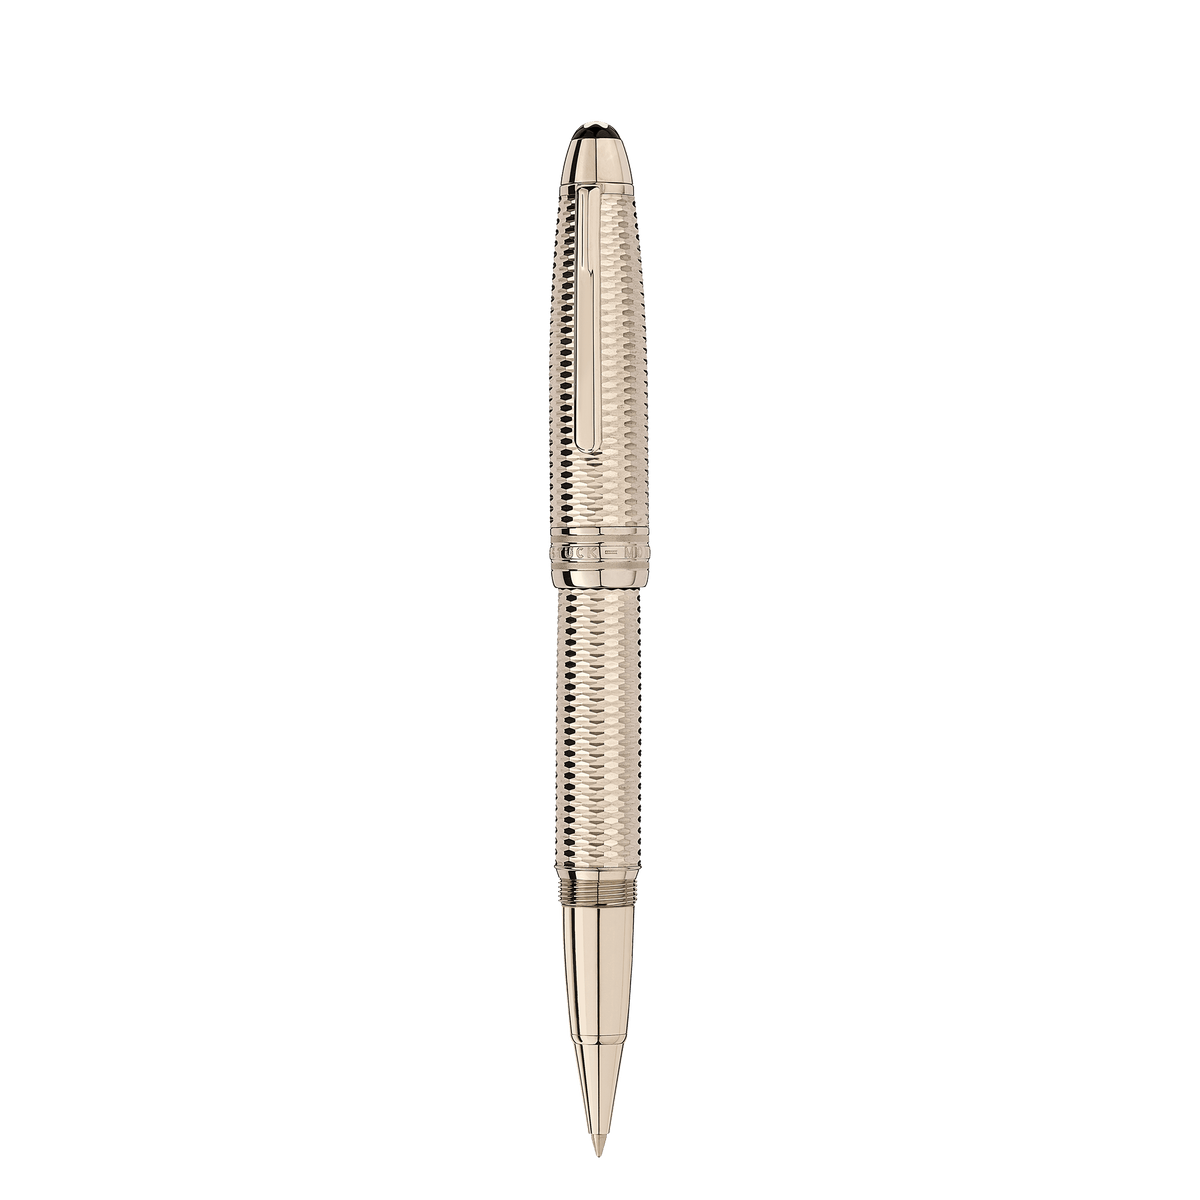 Meisterstück Geometry Solitaire Champagne Gold LeGrand Rollerball